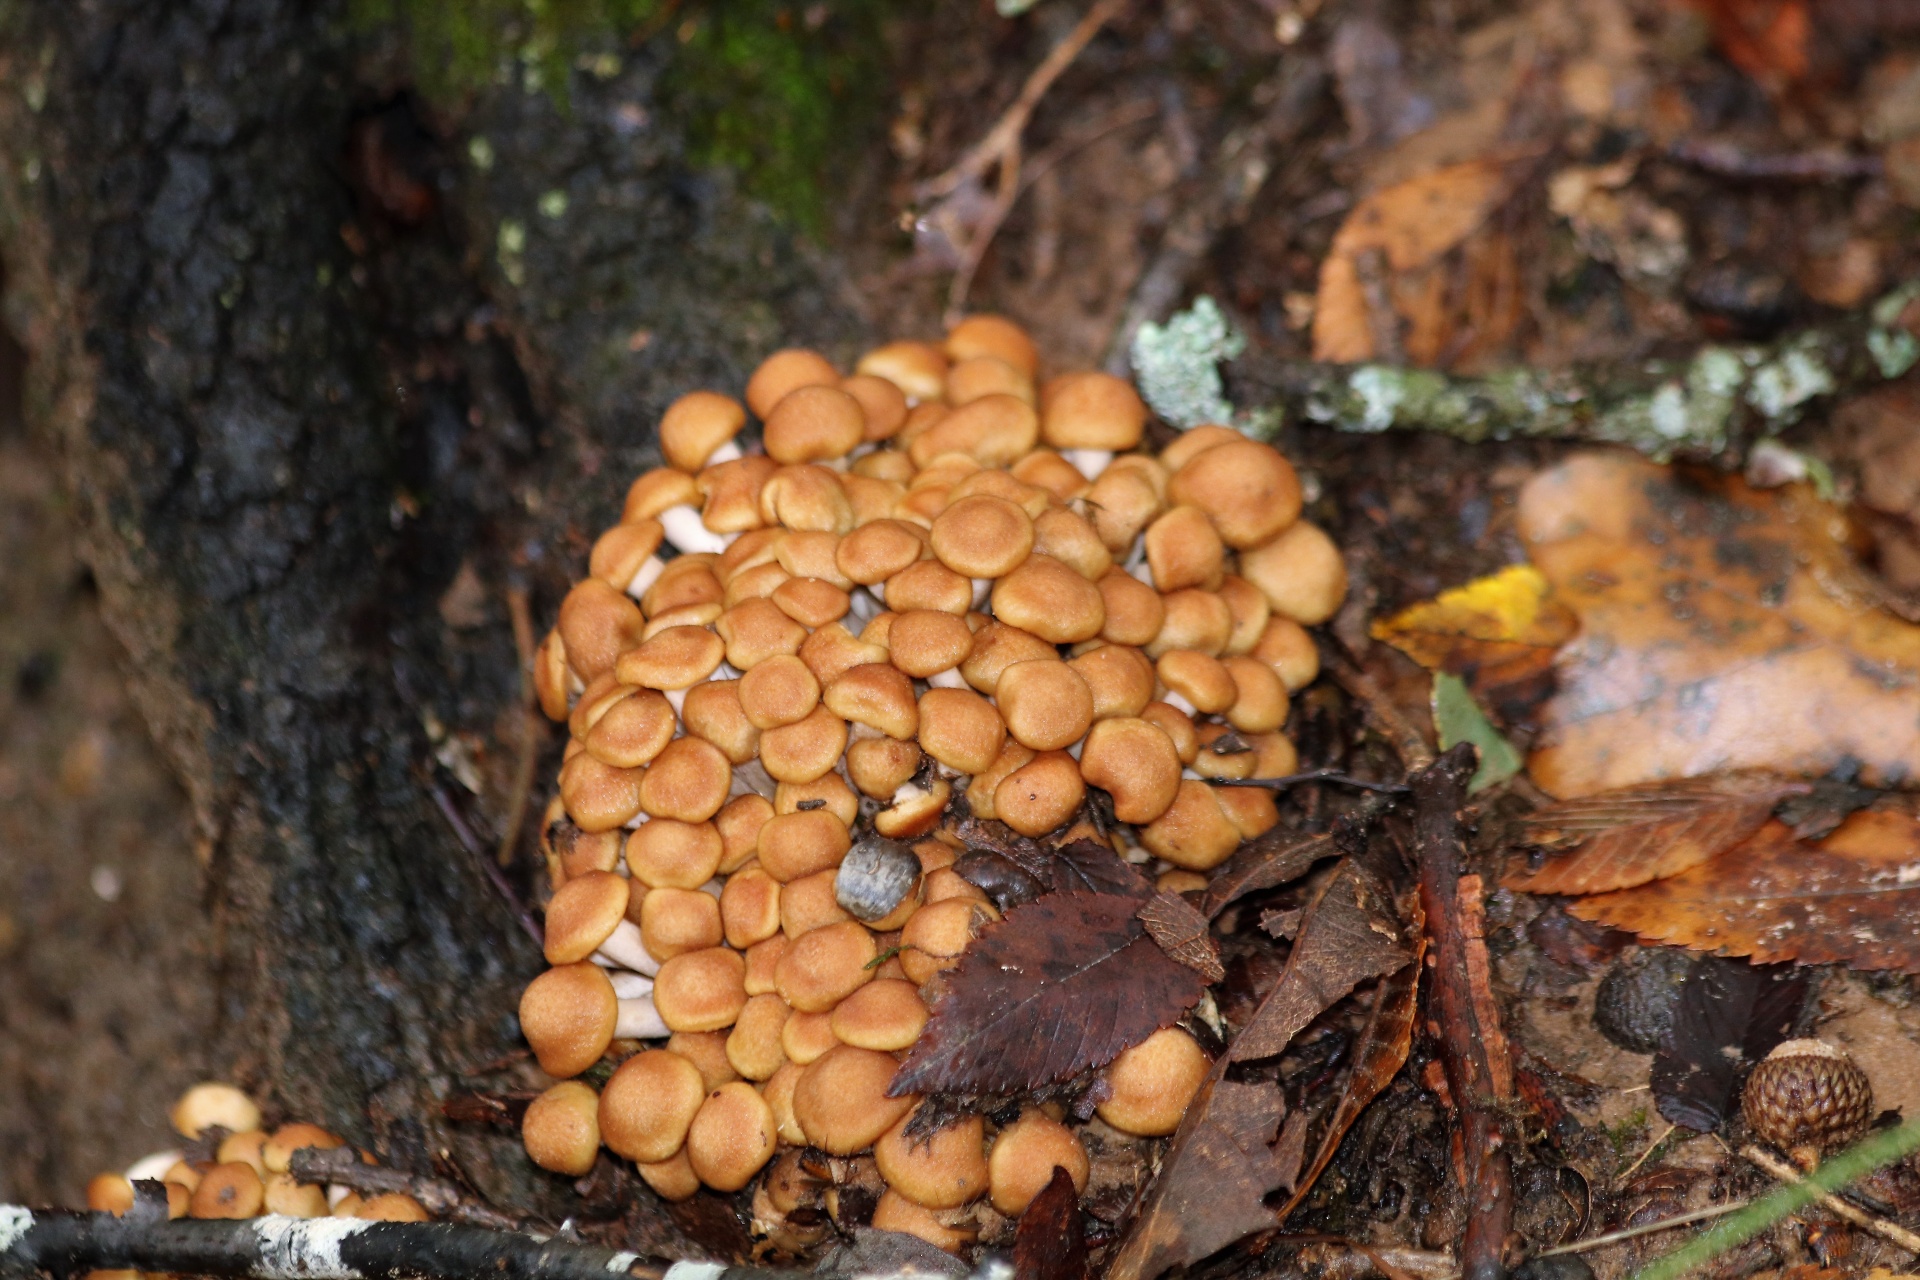 A group of ringless honey mushrooms surrounded by acorns and autumn leaves.